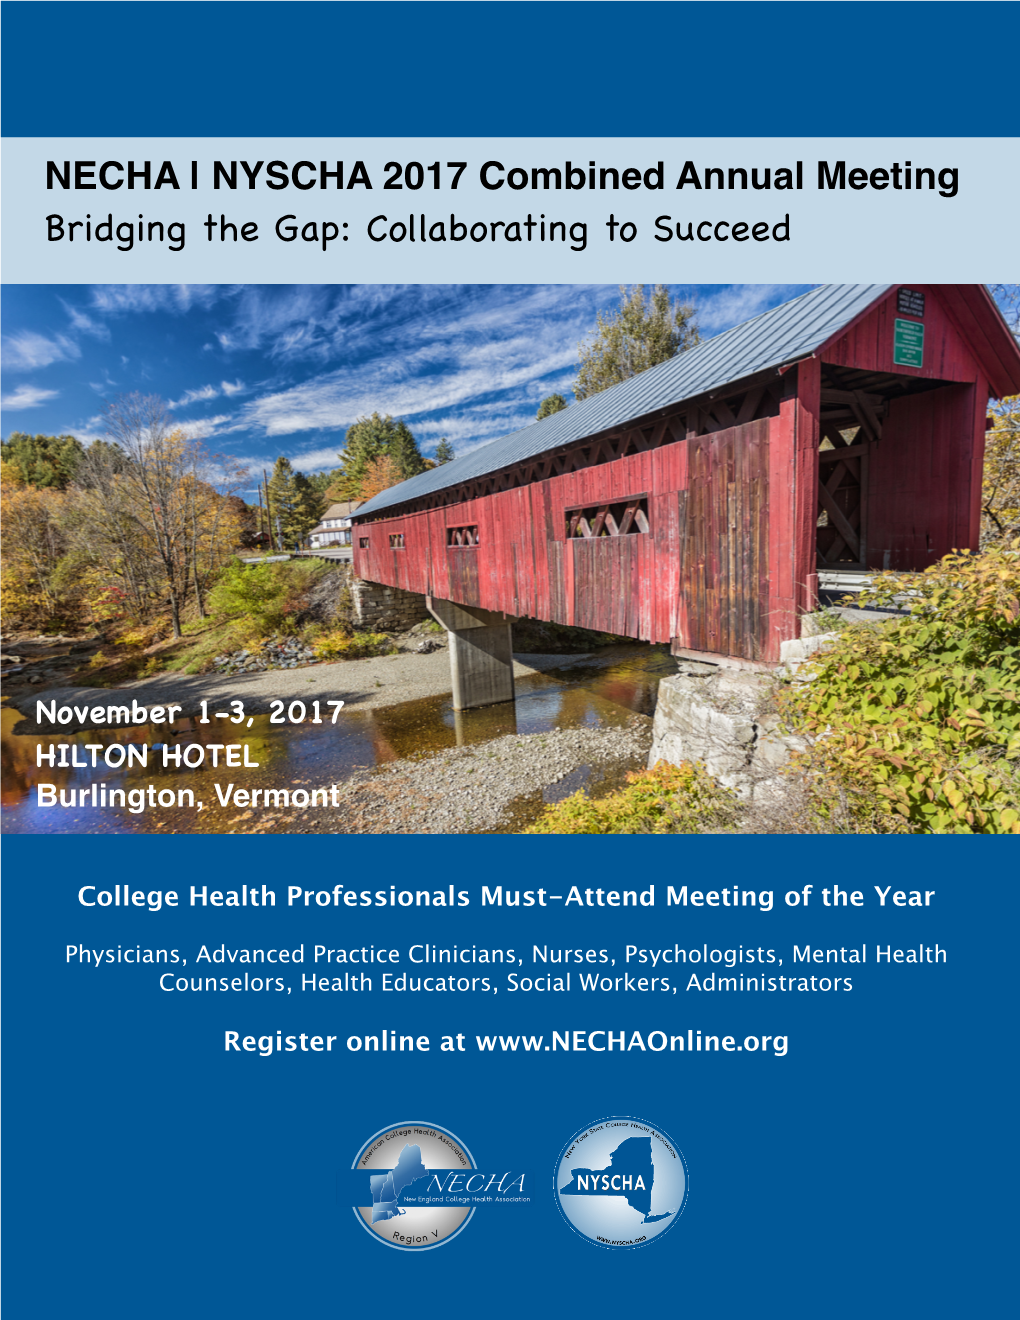 NECHA | NYSCHA 2017 Combined Annual Meeting Bridging the Gap: Collaborating to Succeed